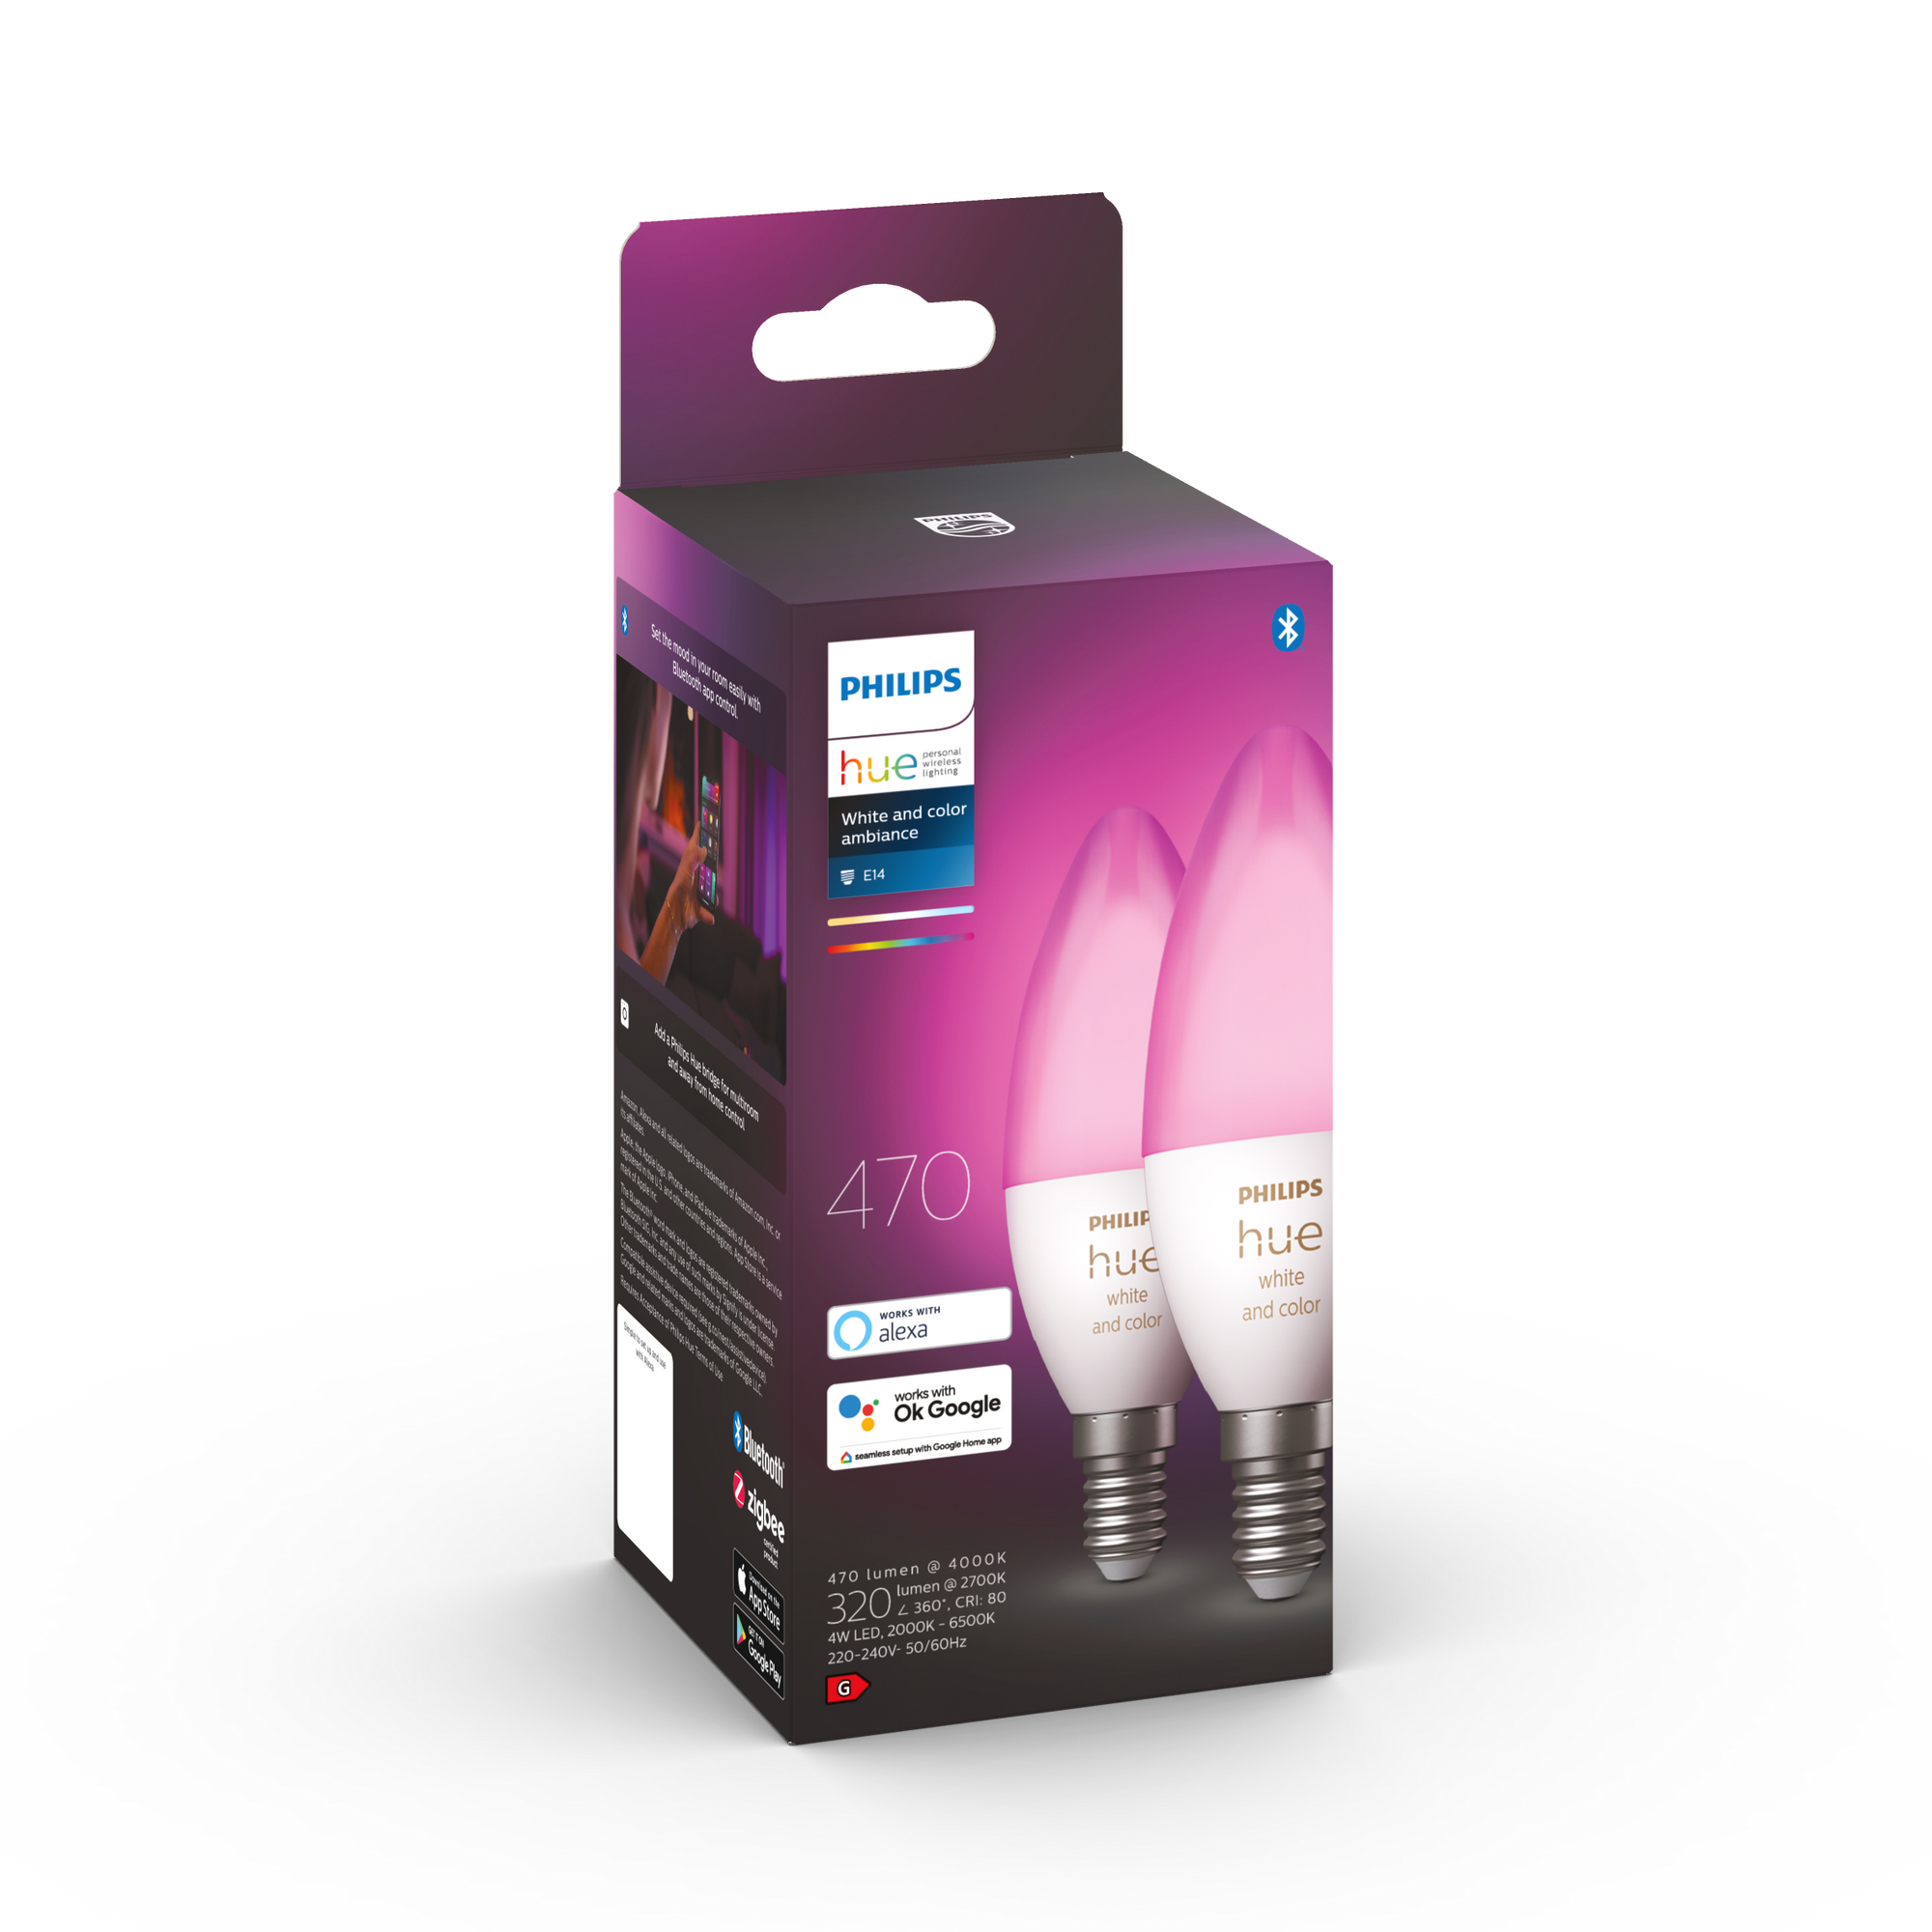 LED-Lampe 'Hue White & Color Ambiance' E14 5,3 W, 2er-Pack + product picture